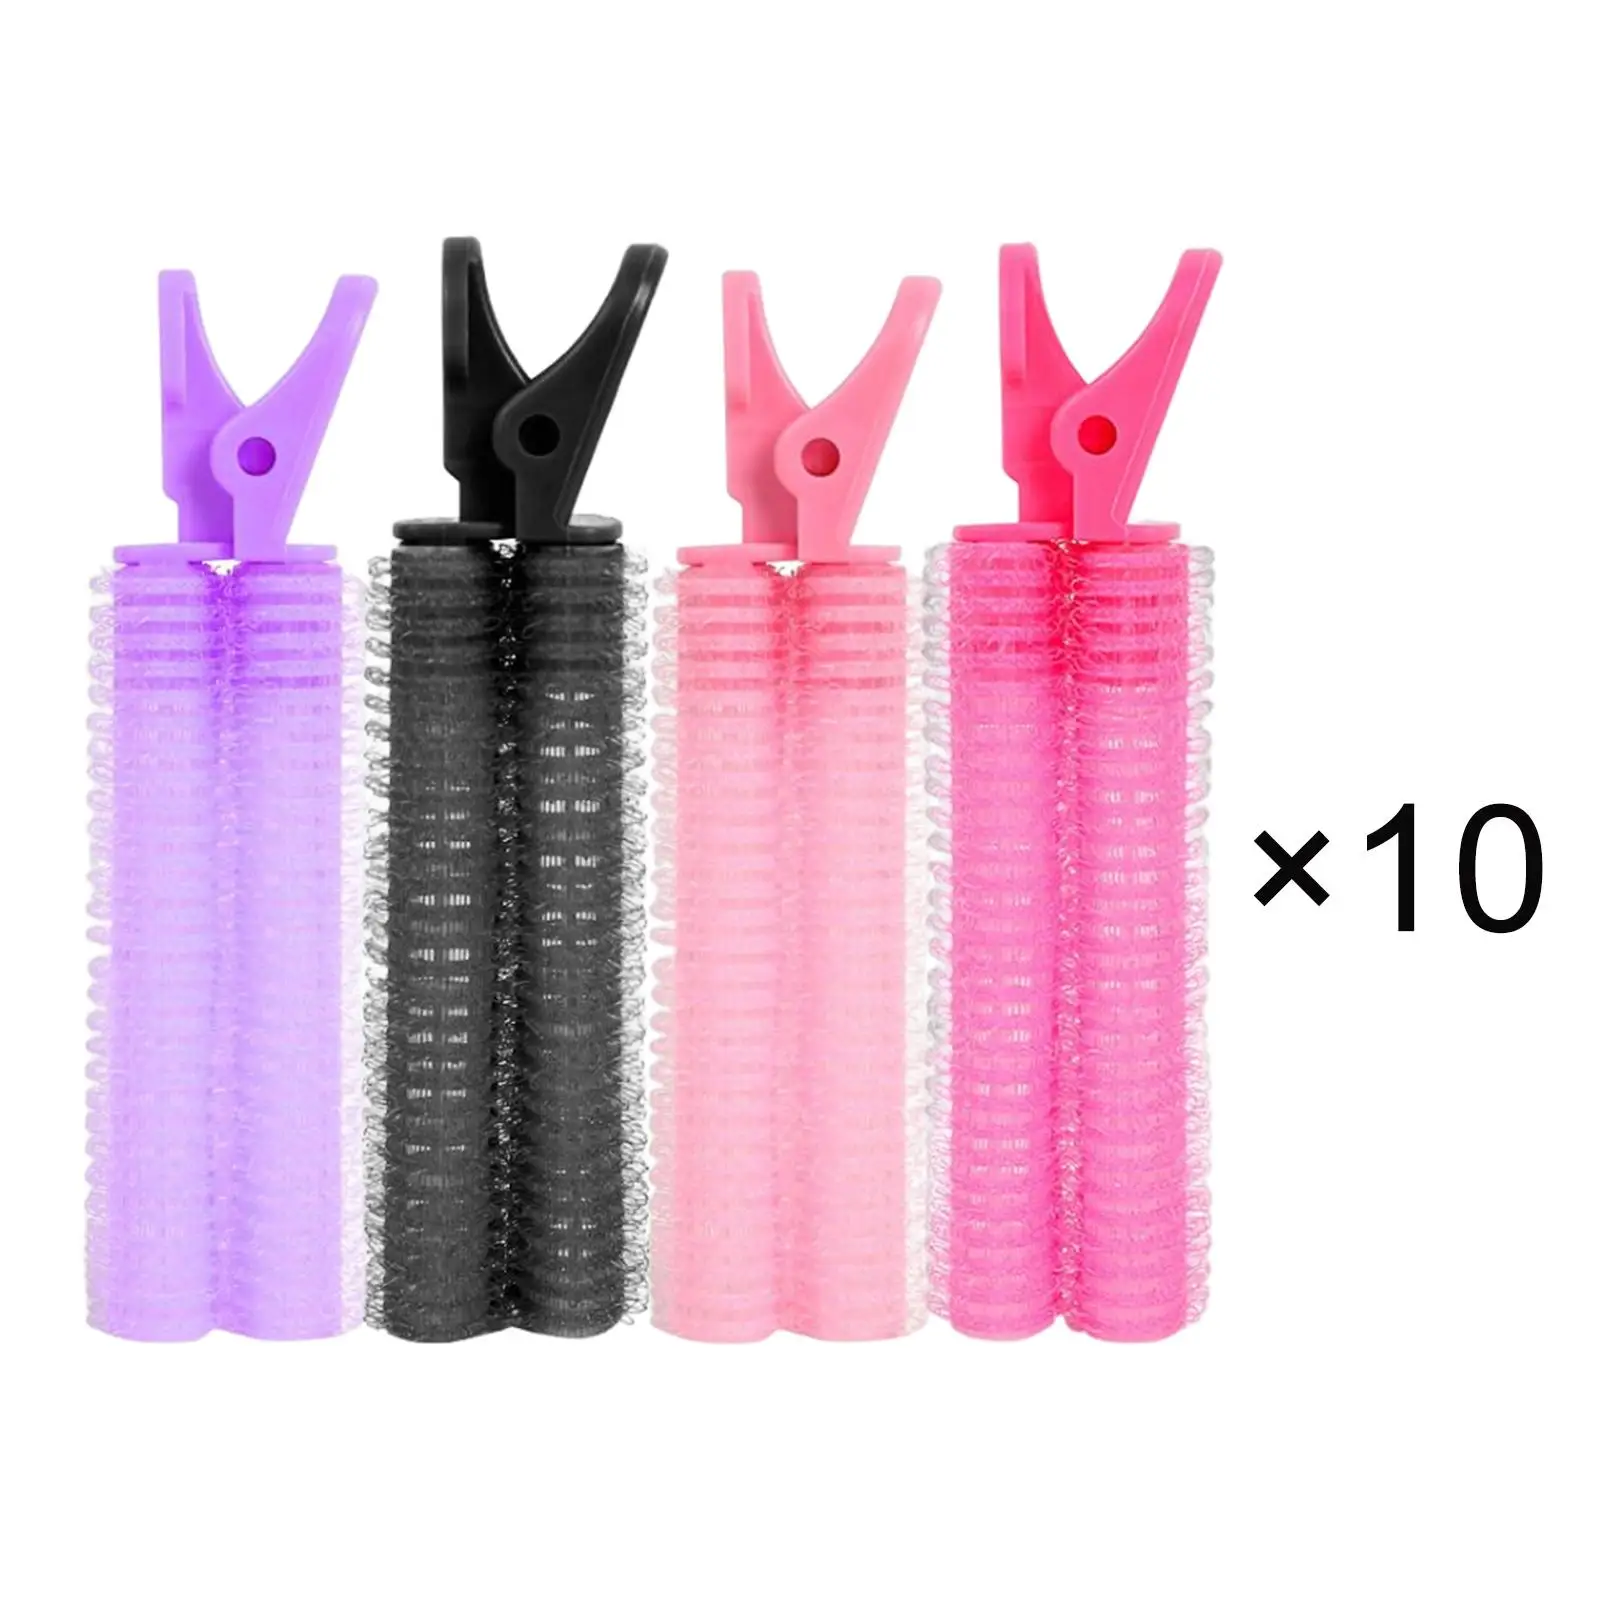 10x Hair Bangs Curling Clips Firmly Fixed Reusable Hair Curler Clips Reusable Hair Roller for DIY Hair Styling Girls Lazy People